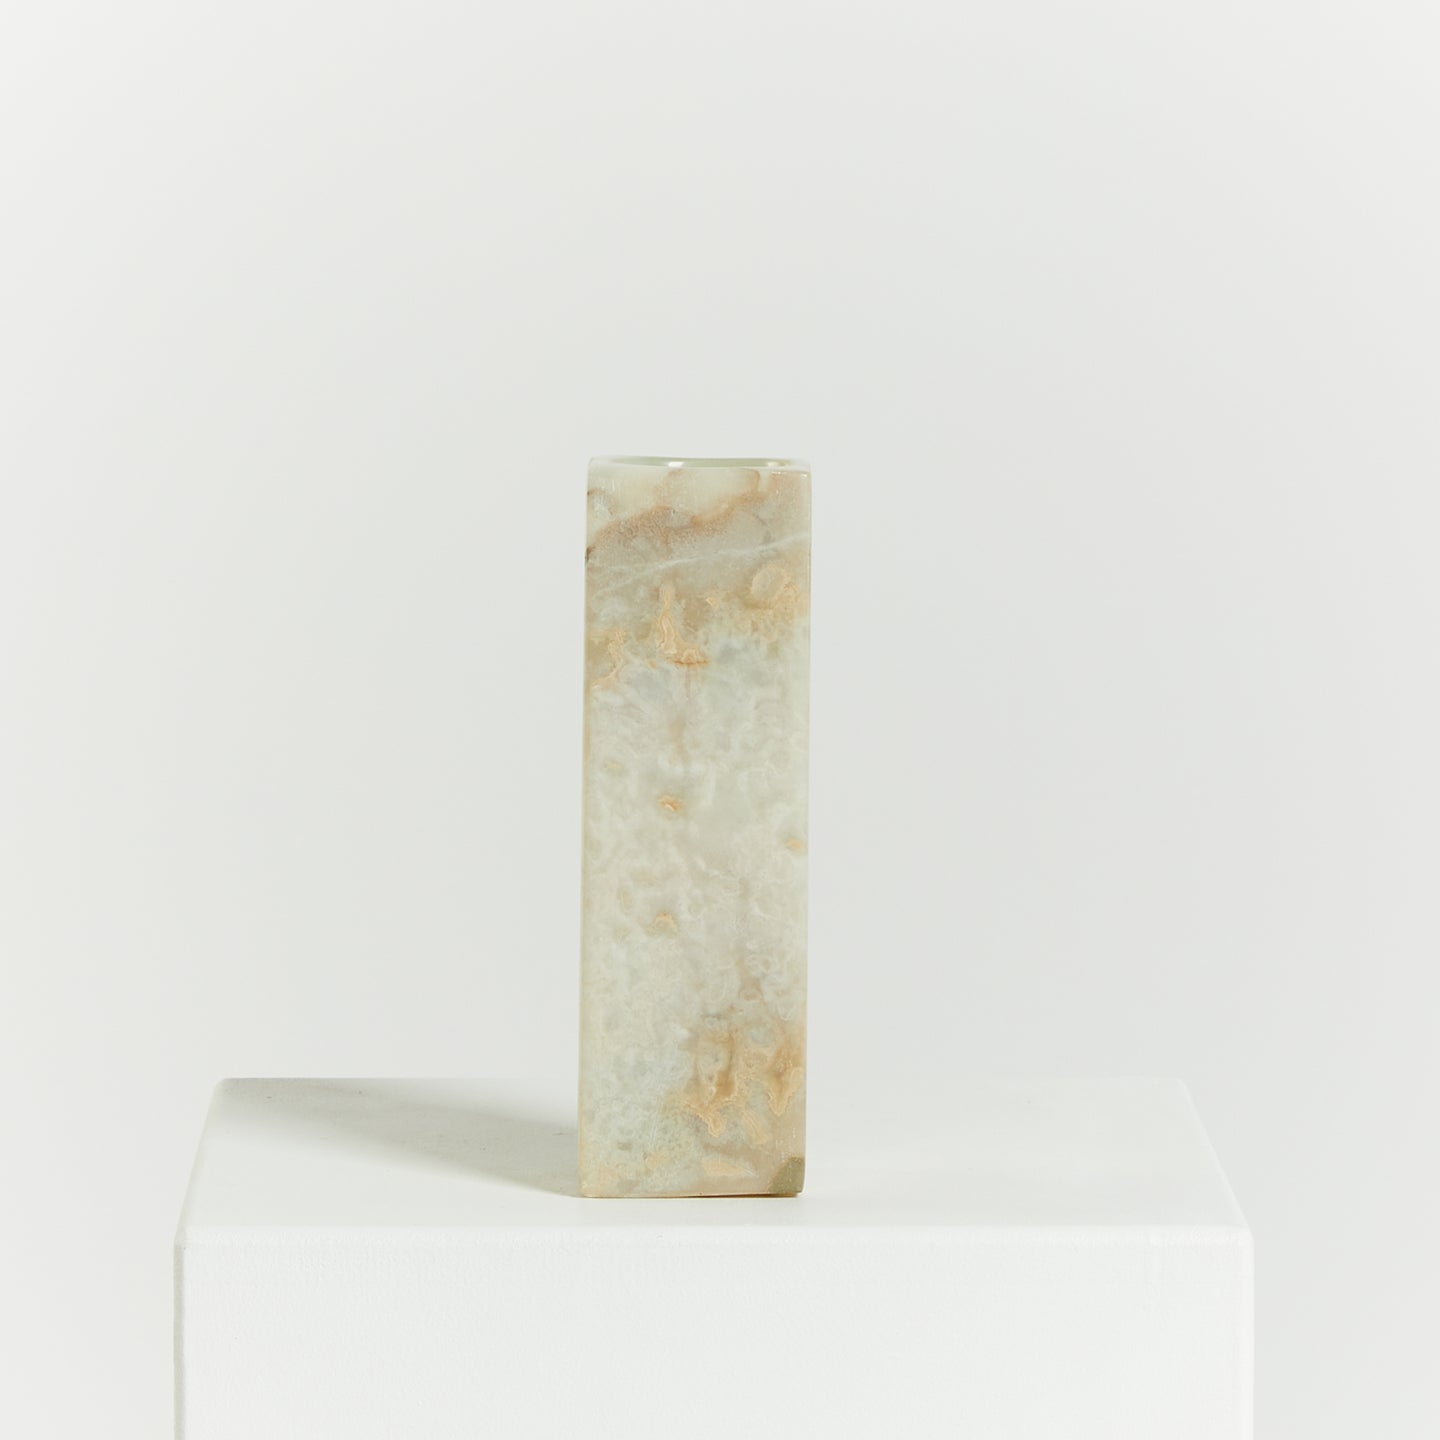 Square-edged onyx vase  - HIRE ONLY